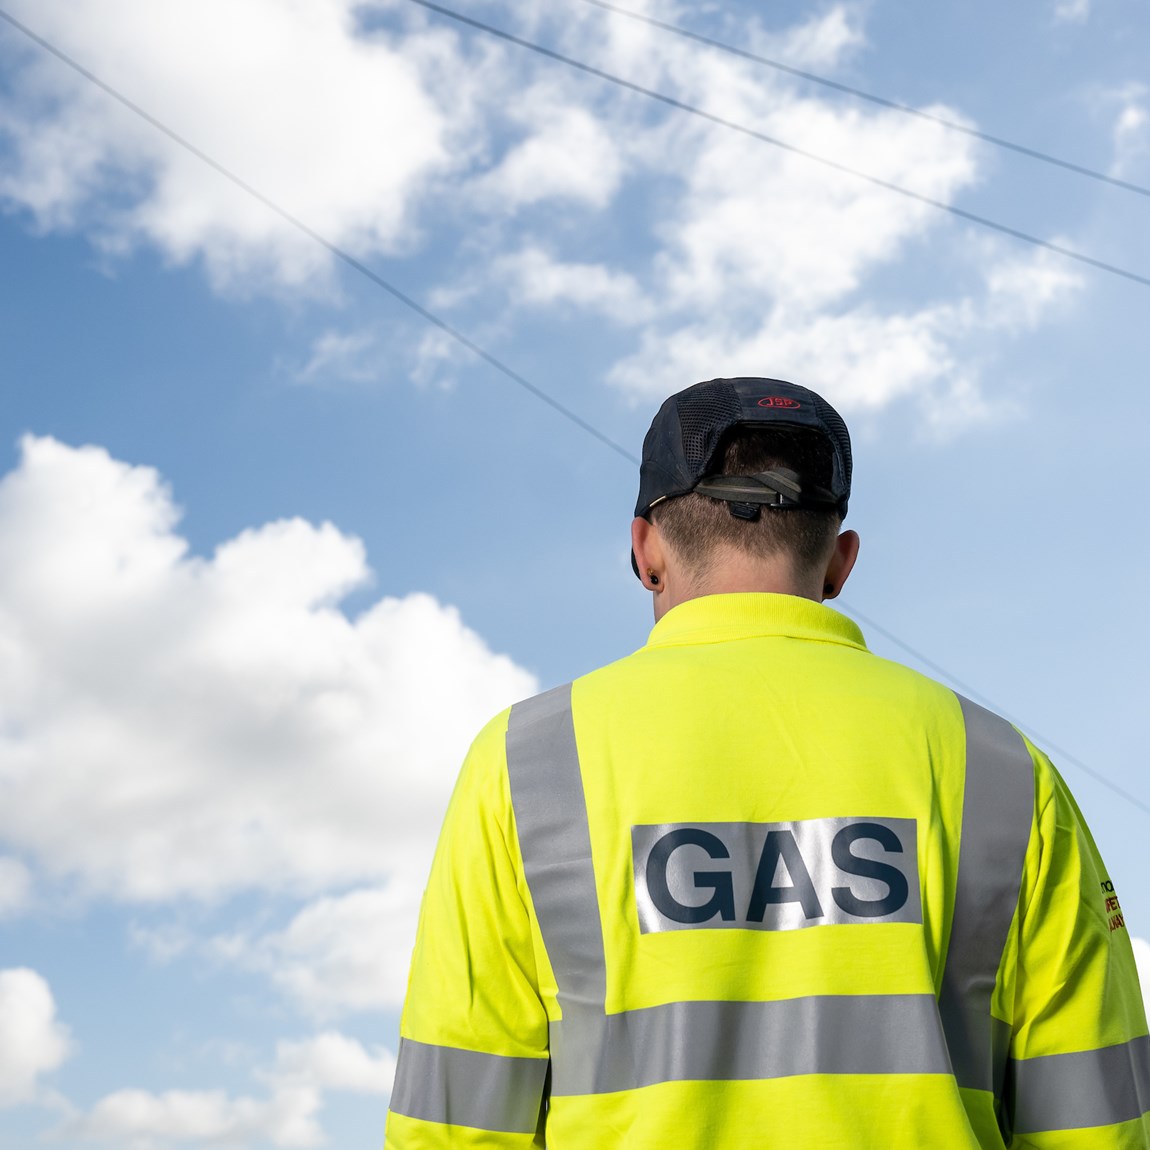 Gas investment work is complete in Budleigh Salterton